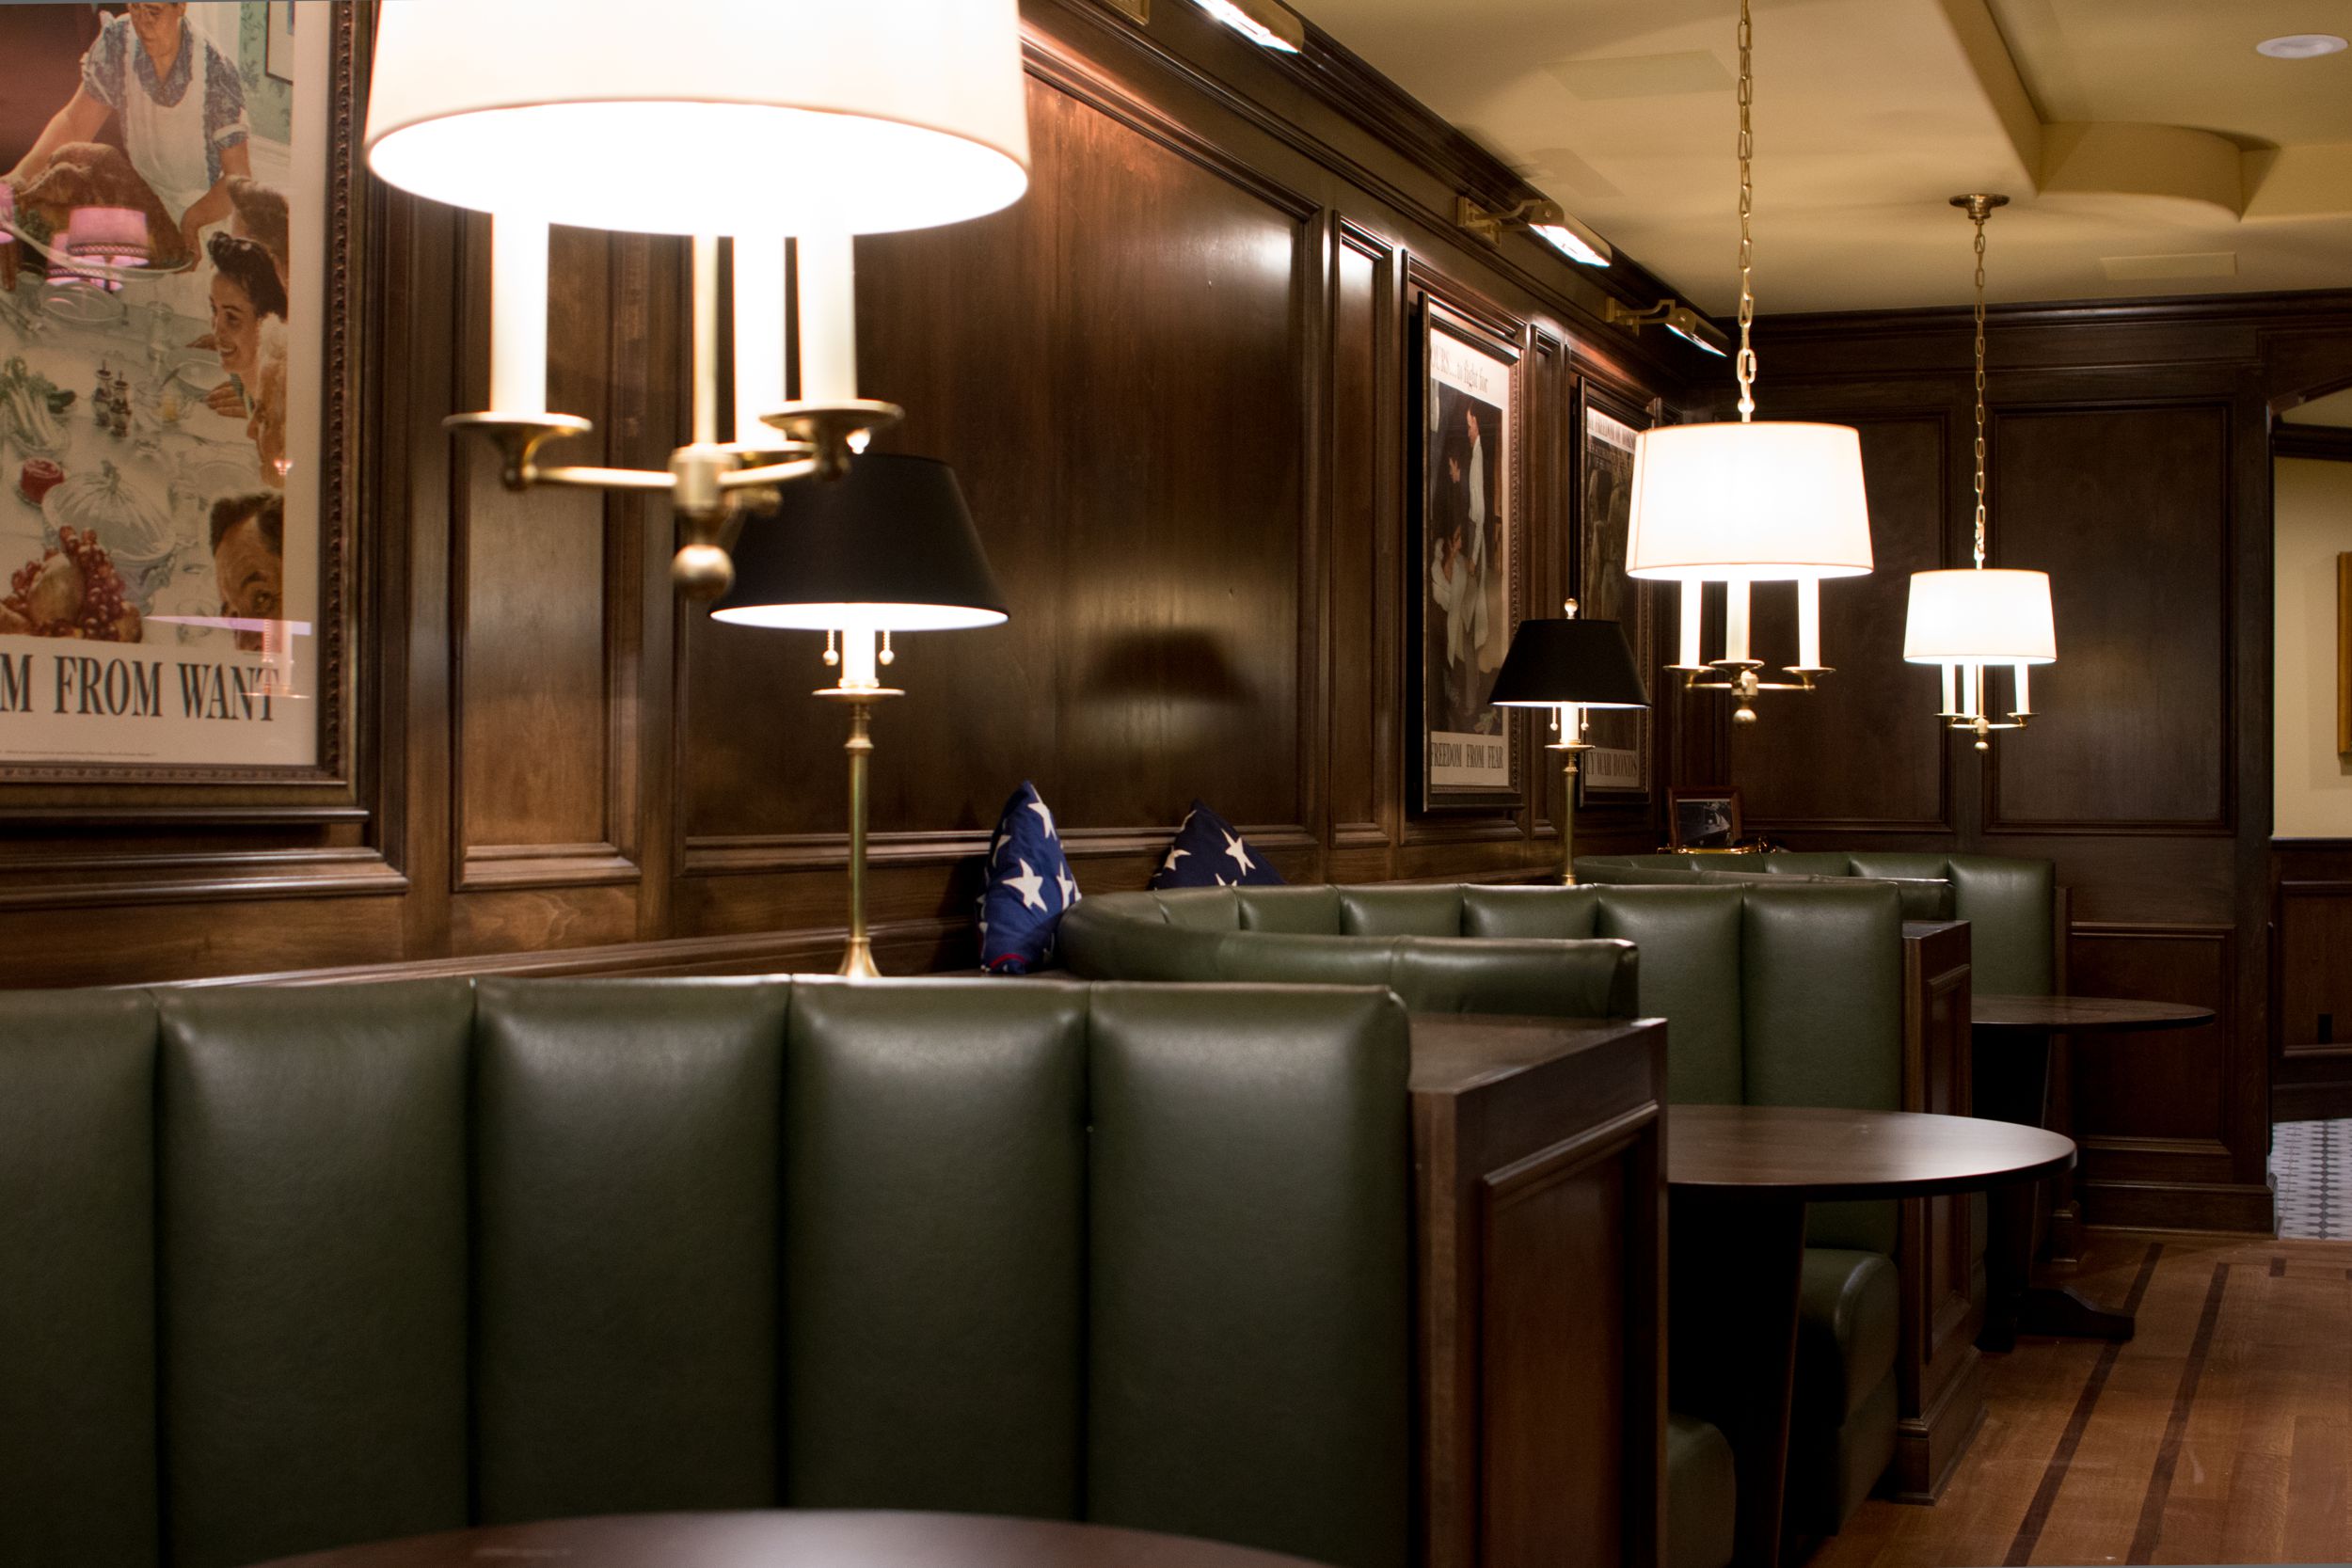 Green leather booths with rich wood paneling